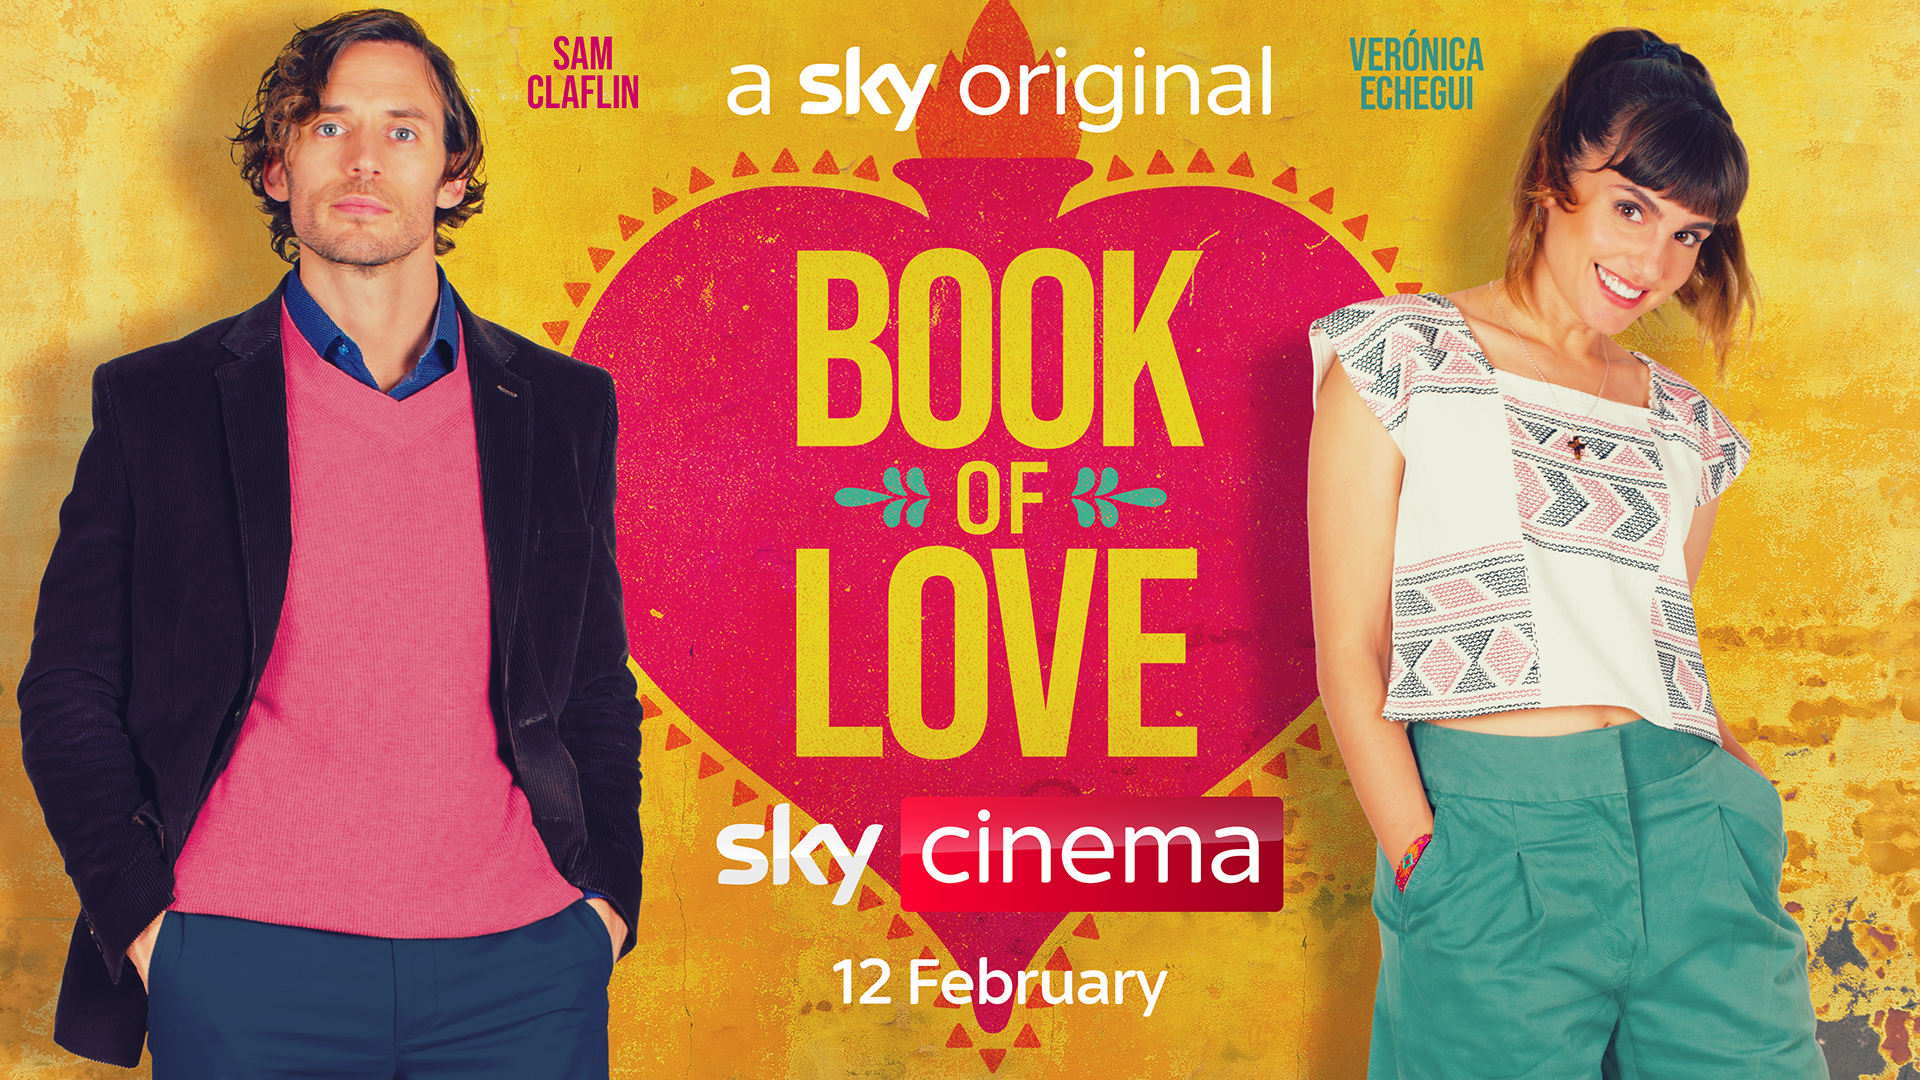 A promo photo for Book of Love featuring Sam Claflin and Verónica Echegui standing next to each other with Book of Love written in the middle of them